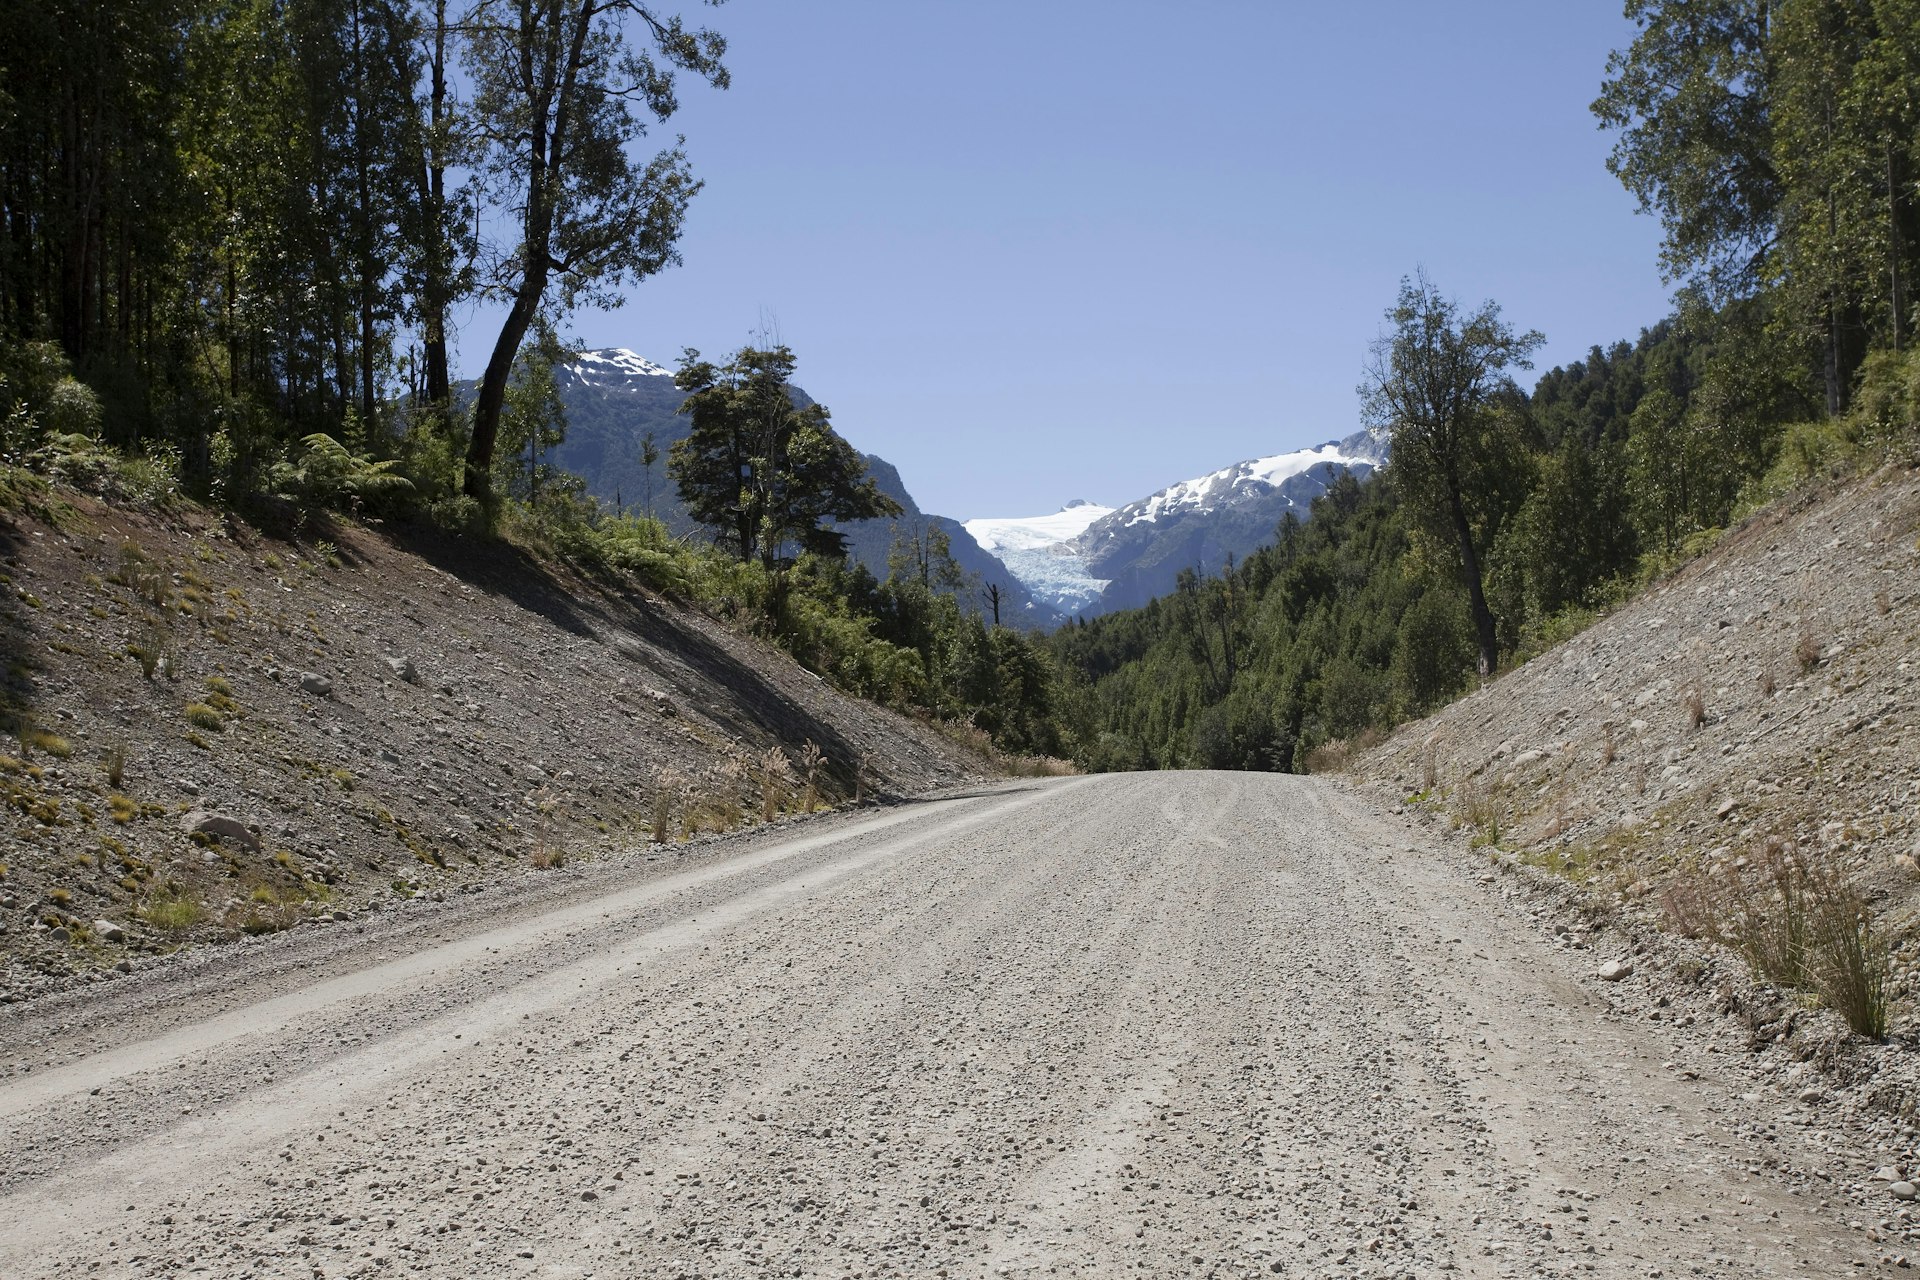 The Carretera Austral is often unpaved © Bas Wallet / CC BY 2.0